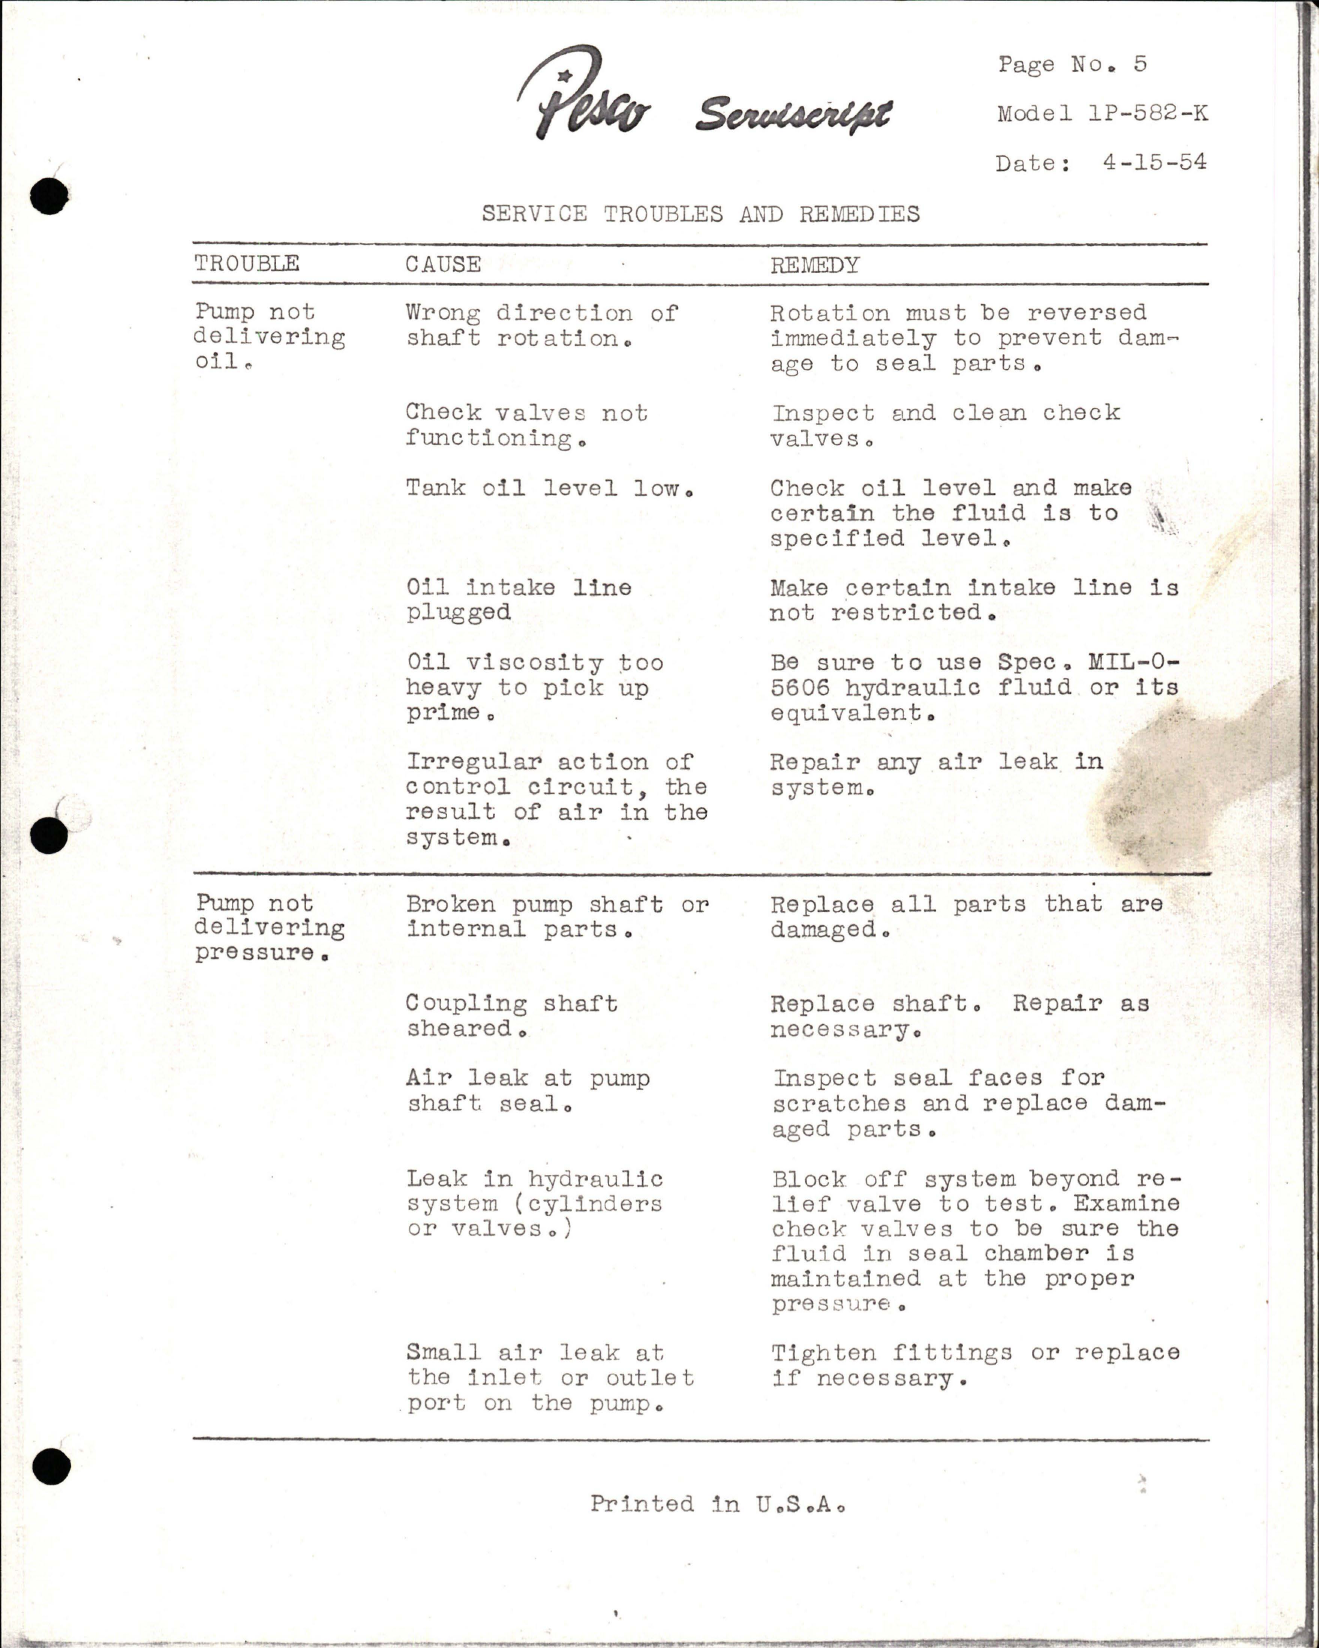 Sample page 5 from AirCorps Library document: Pesco Serviscript Maintenance and Overhaul Instructions with Test Procedures for Hydraulic Gear Pump - Model 1P-582-K